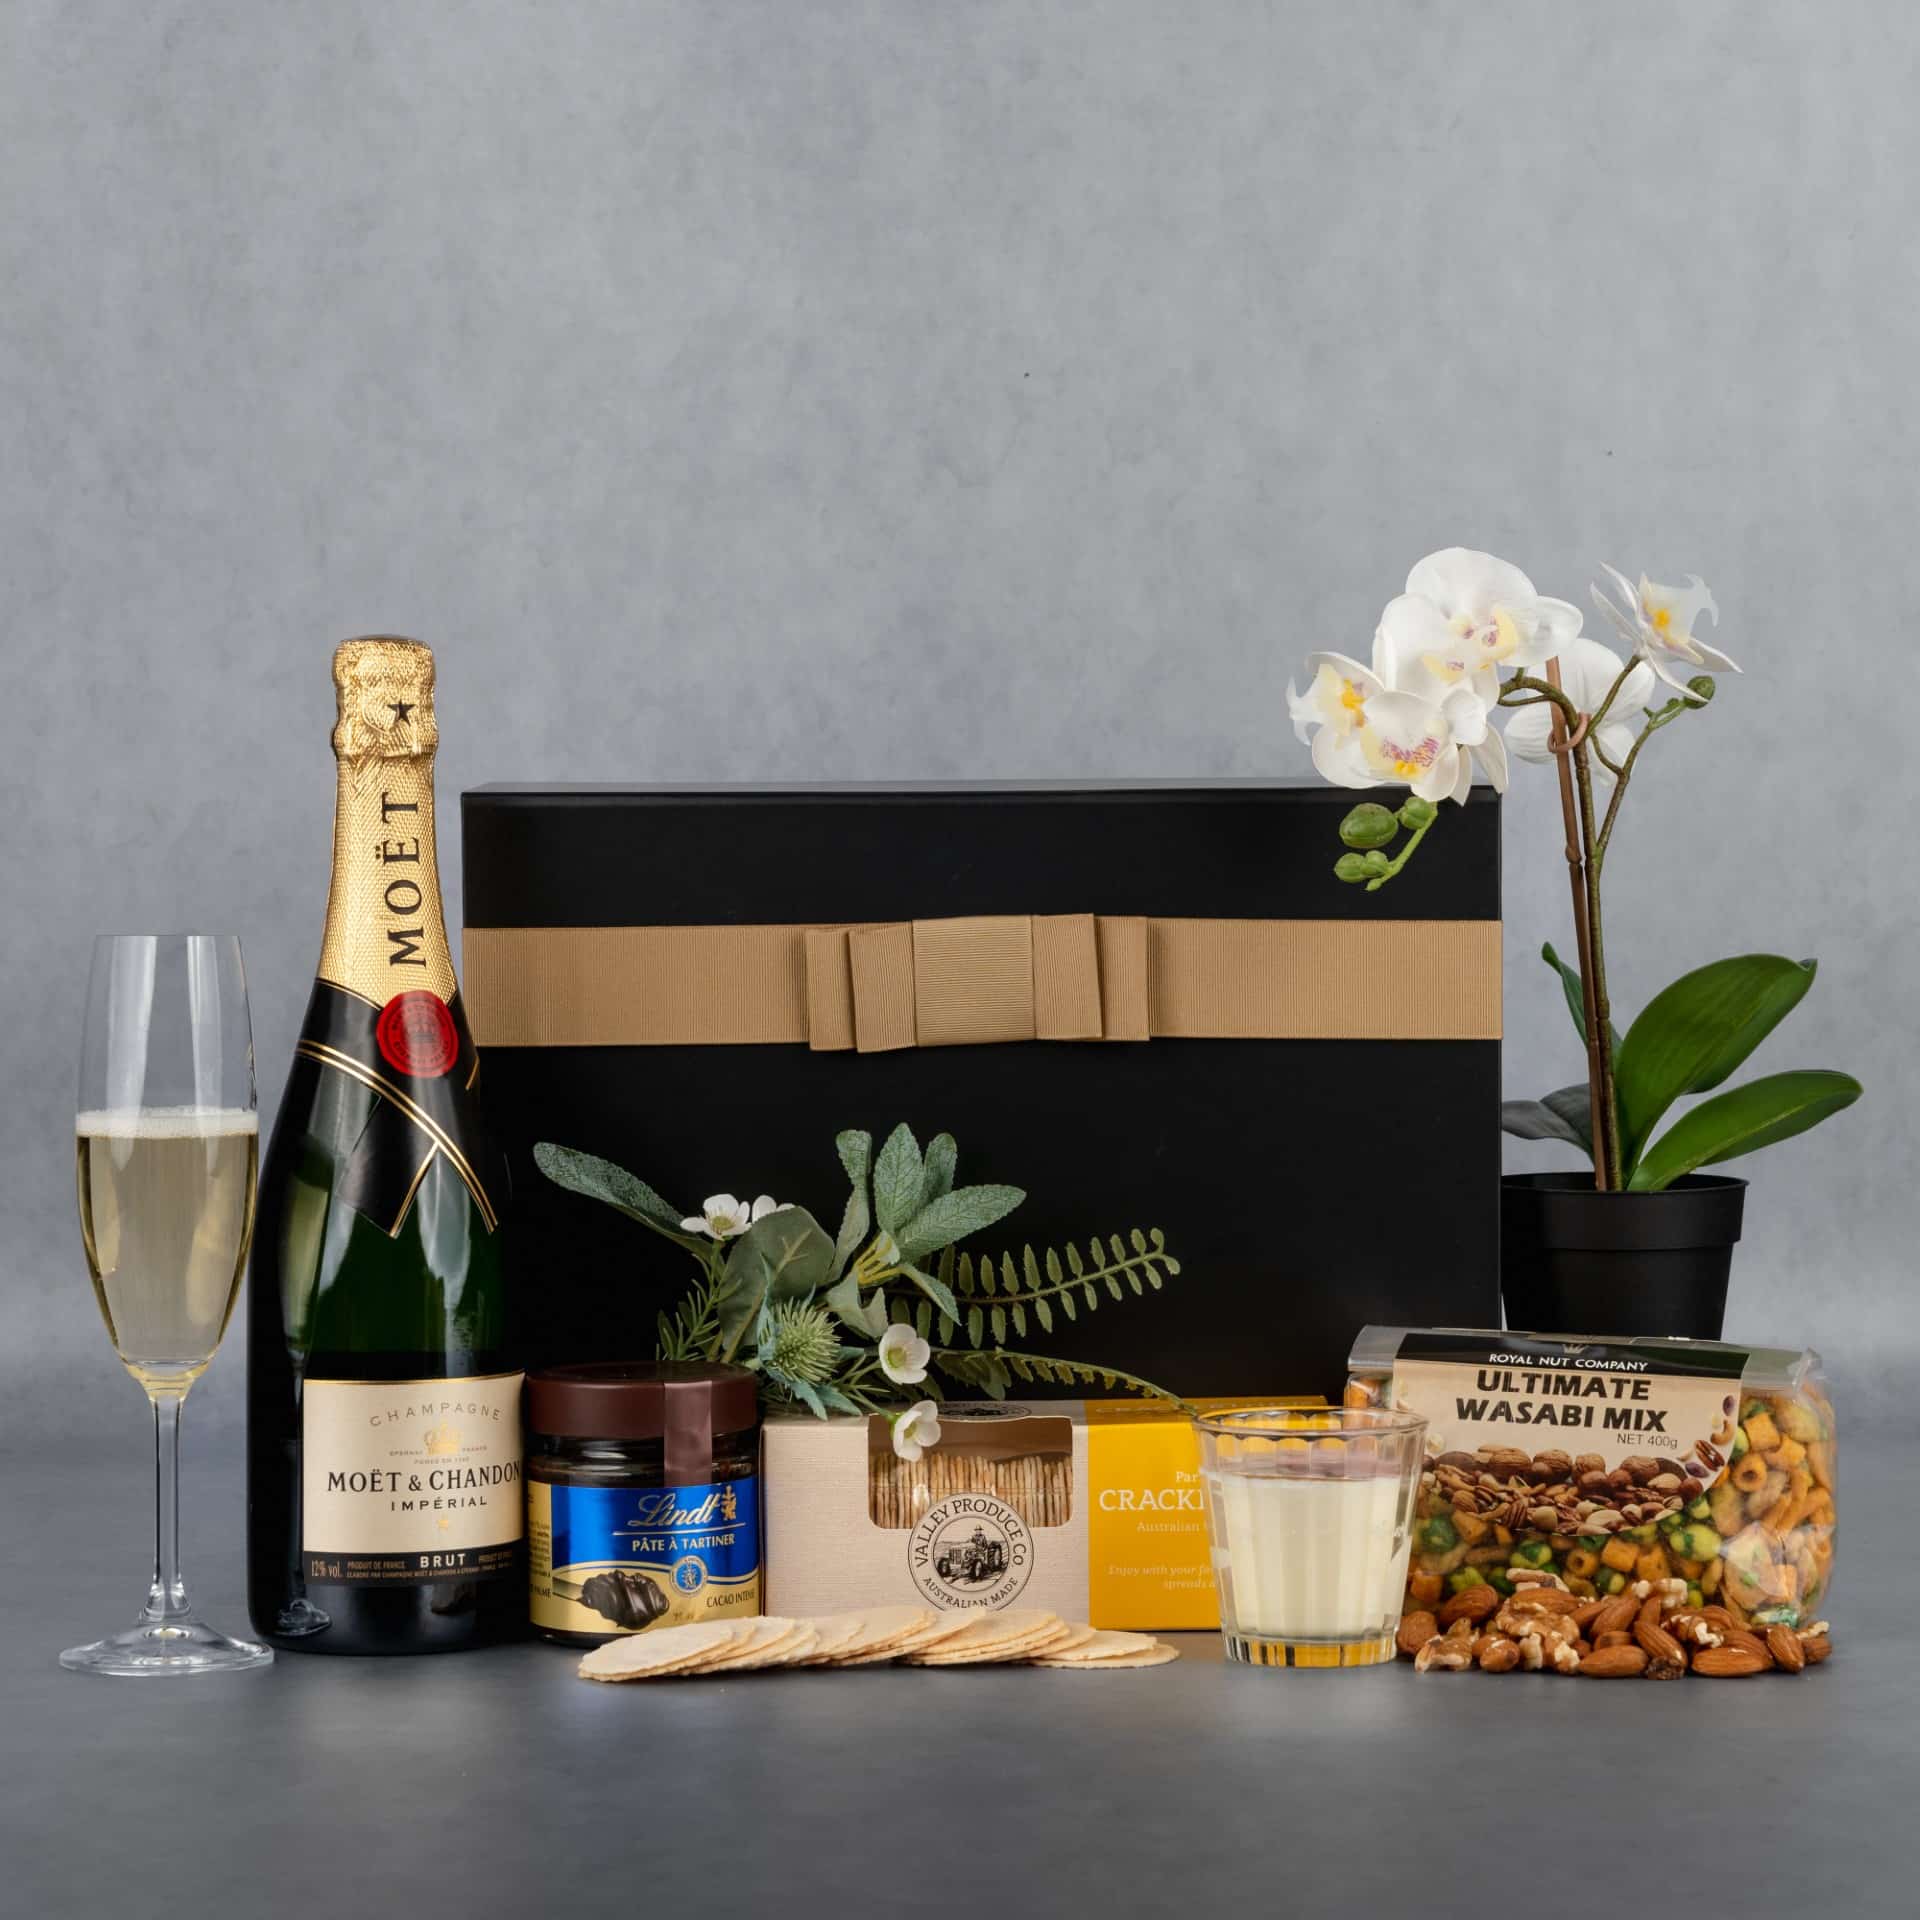 Relax with Moet and Chandon - The Hamper Boutique Co